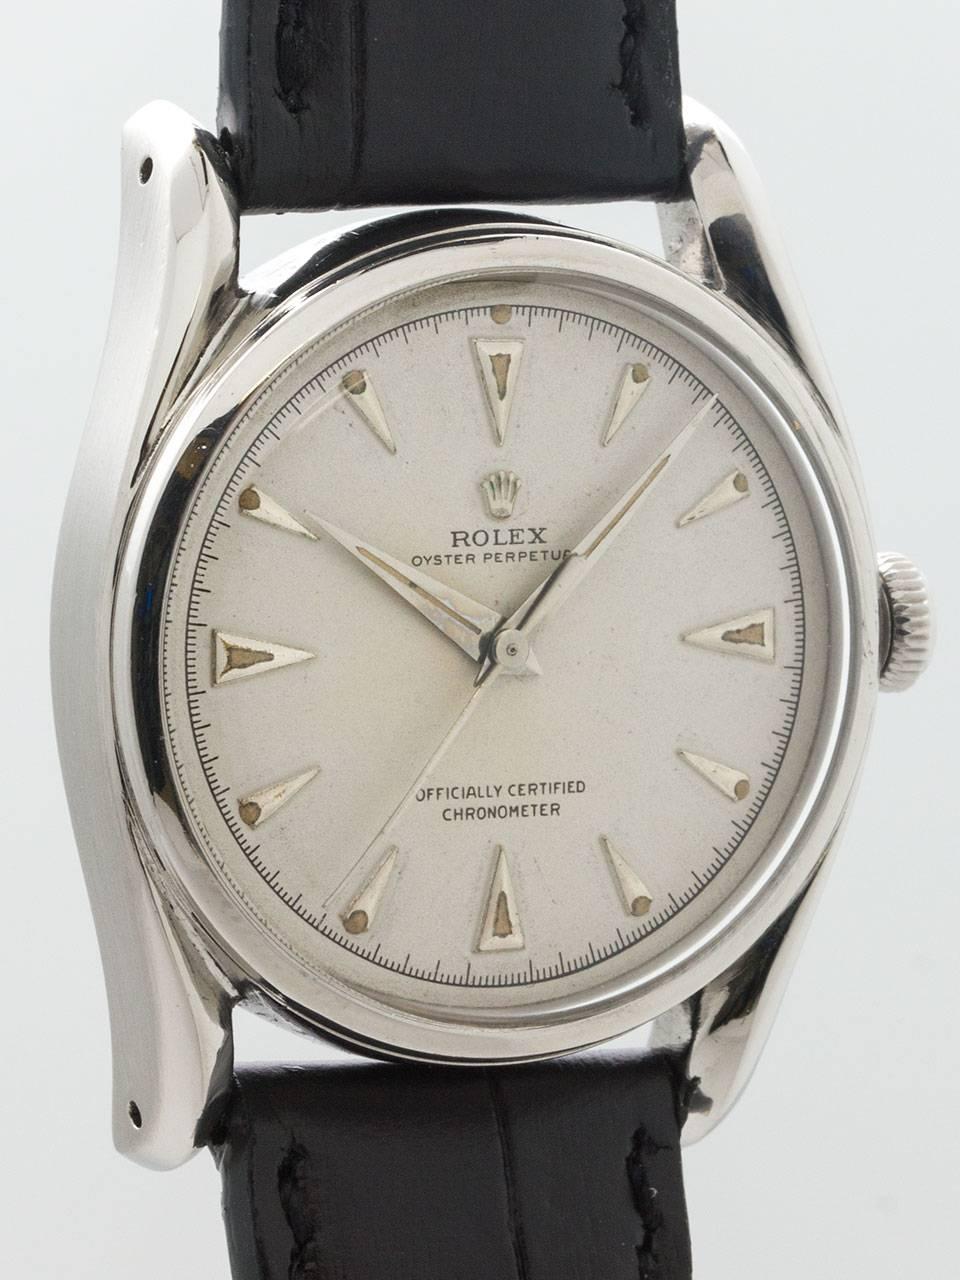 
Scarce and desirable model Rolex stainless steel “Bombe ref 5018 serial # 641,xxx circa 1948. Featuring 35mm diameter case with extended bowed lugs, smooth bezel, acrylic crystal, and very pleasing older refinished antique white dial with raised